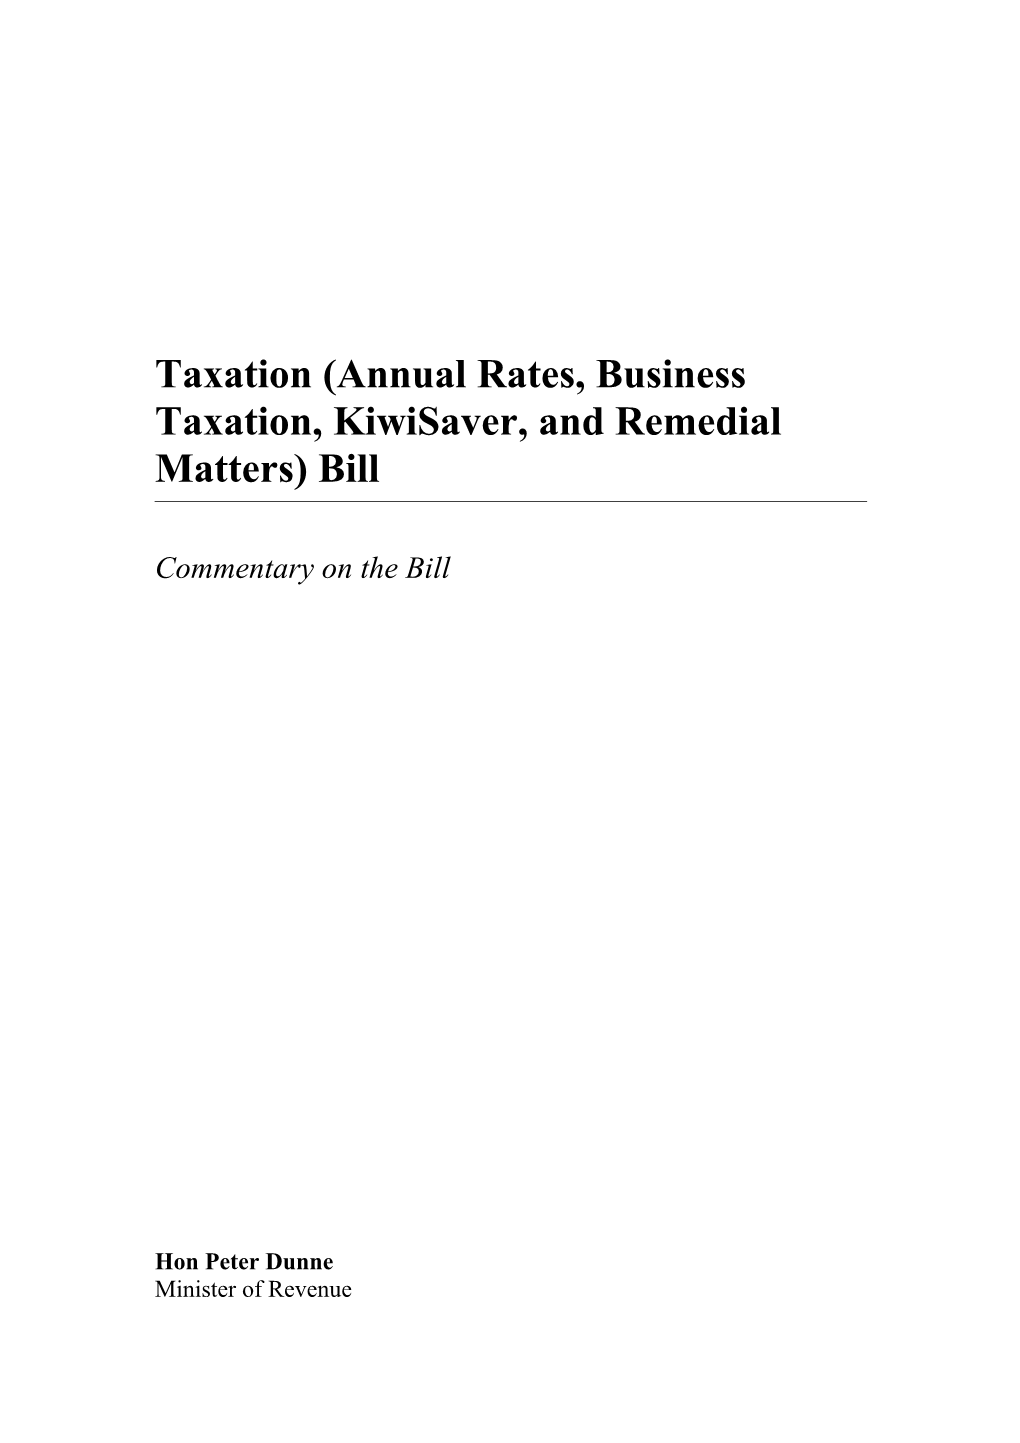 Taxation (Annual Rates, Business Taxation, Kiwisaver, and Remedial Matters) Bill